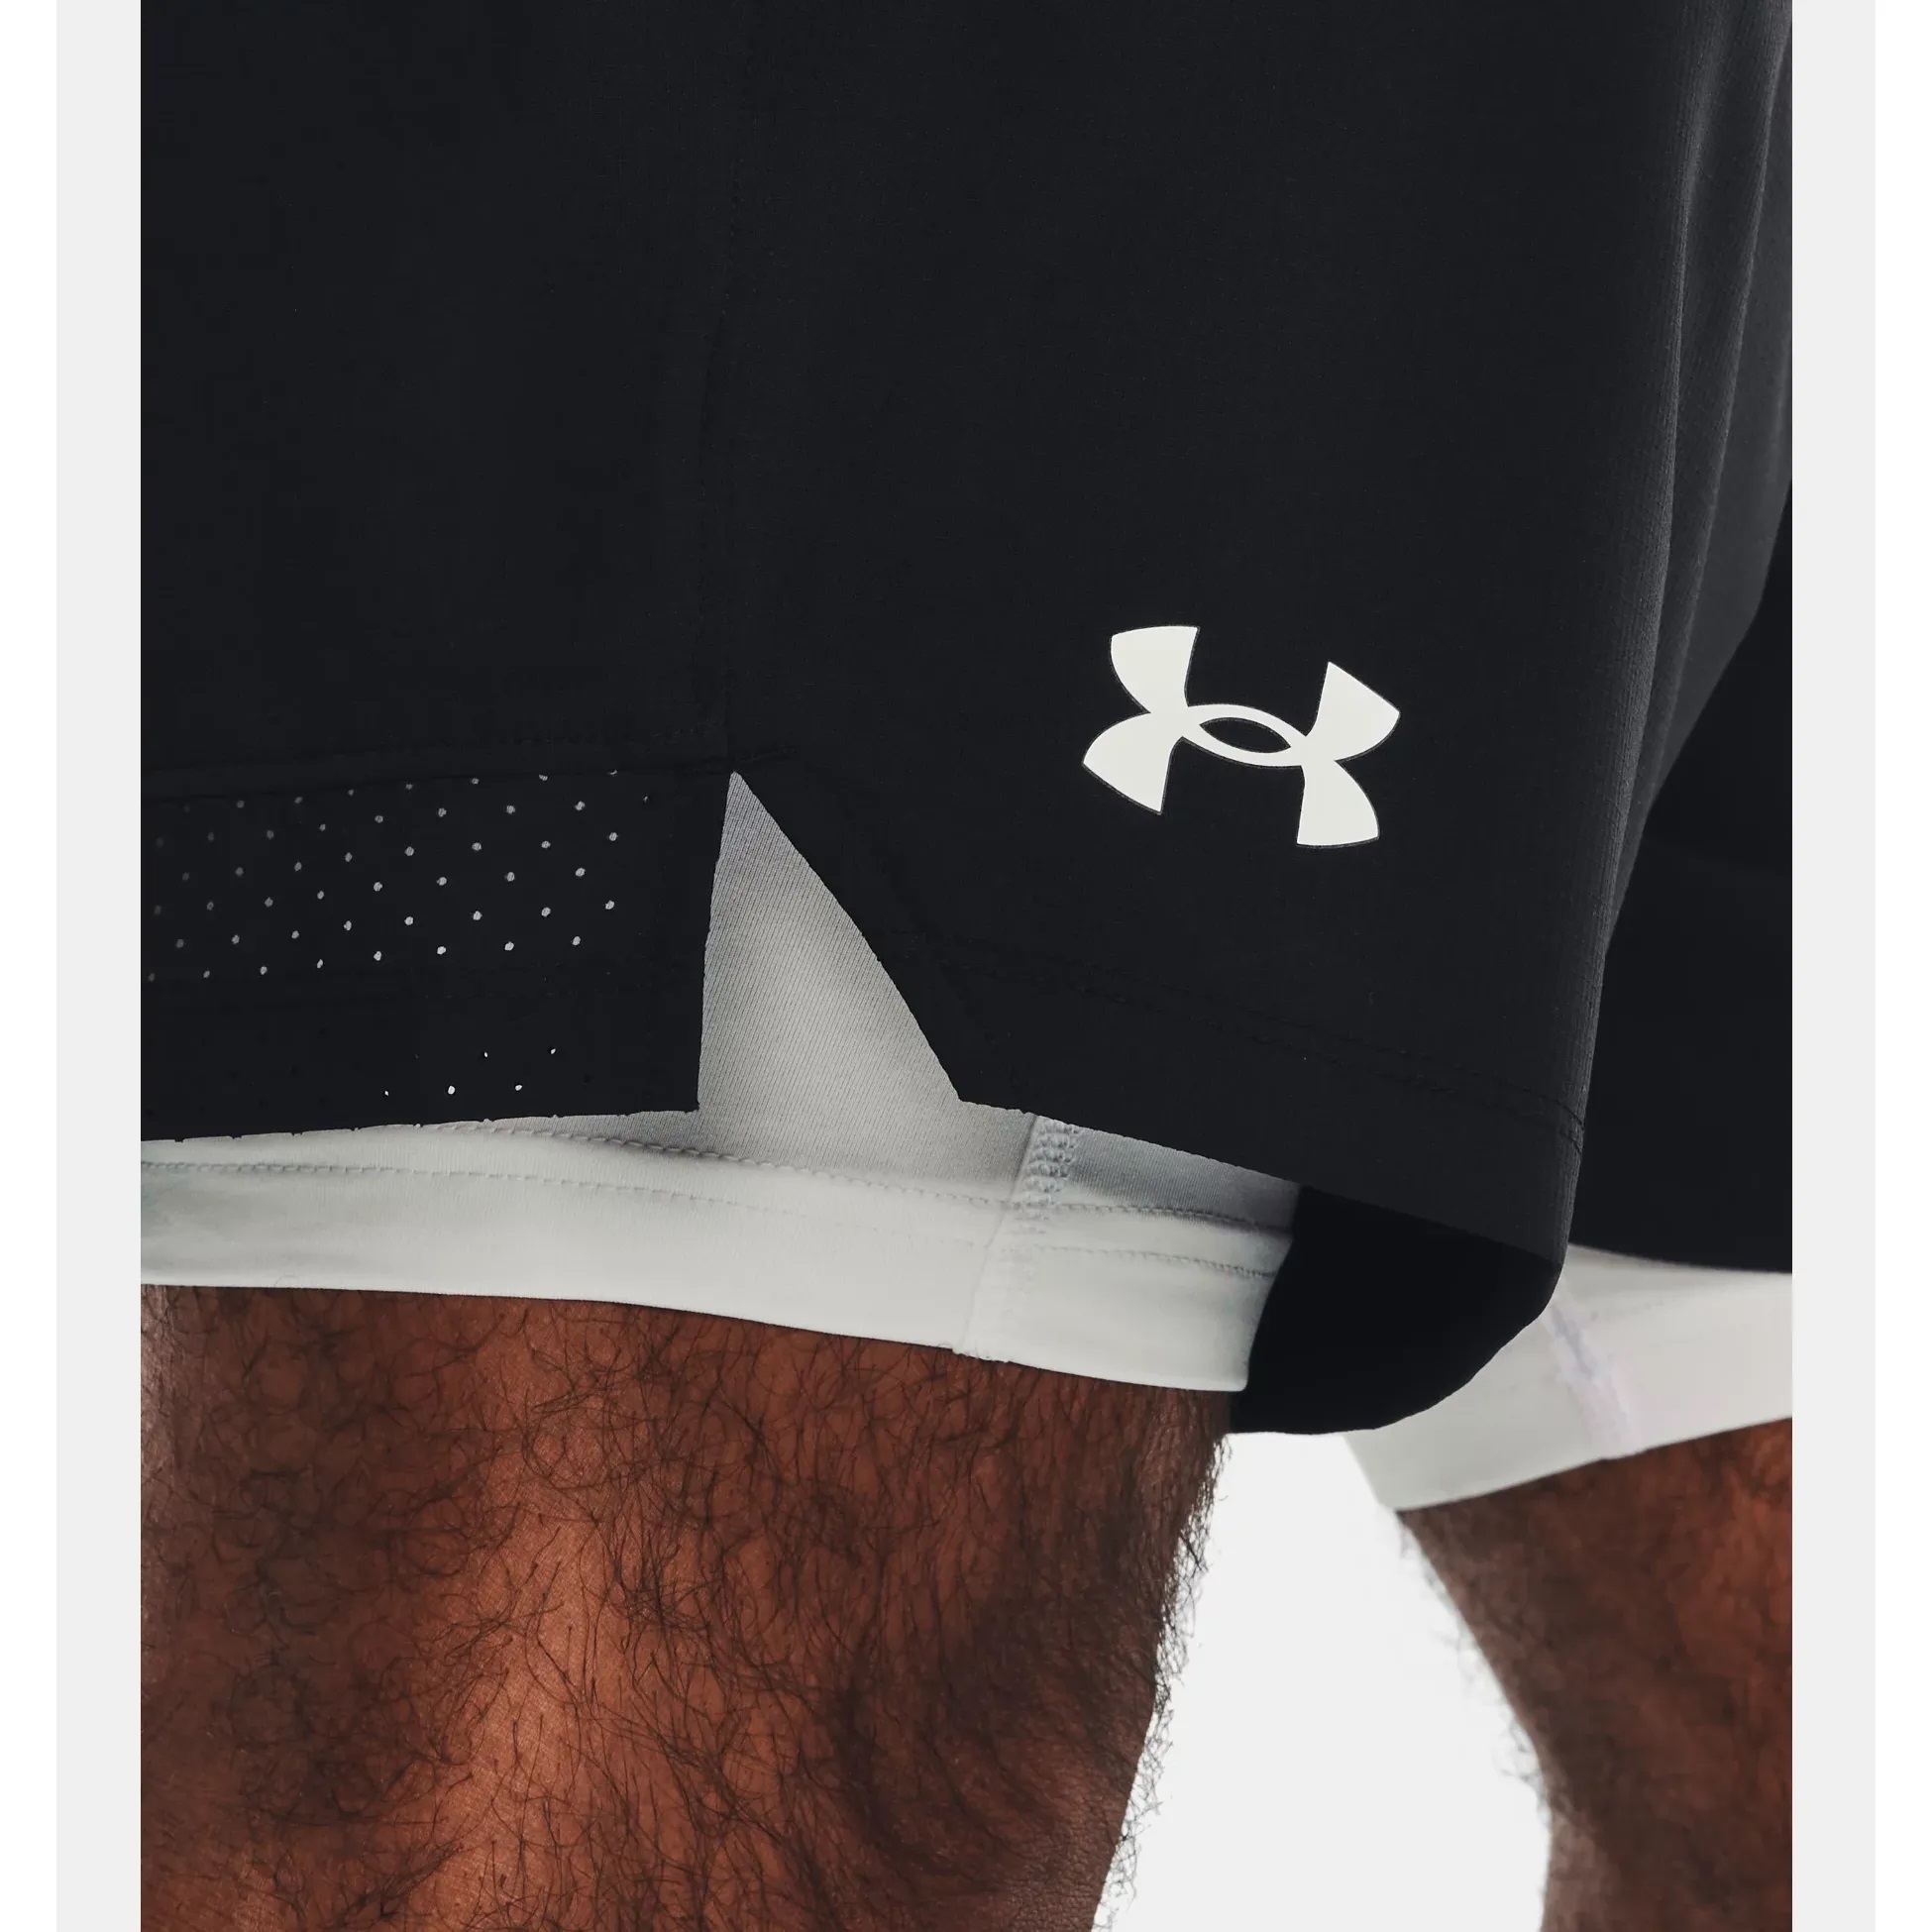 Shorts -  under armour Vanish Woven 2-in-1 Shorts